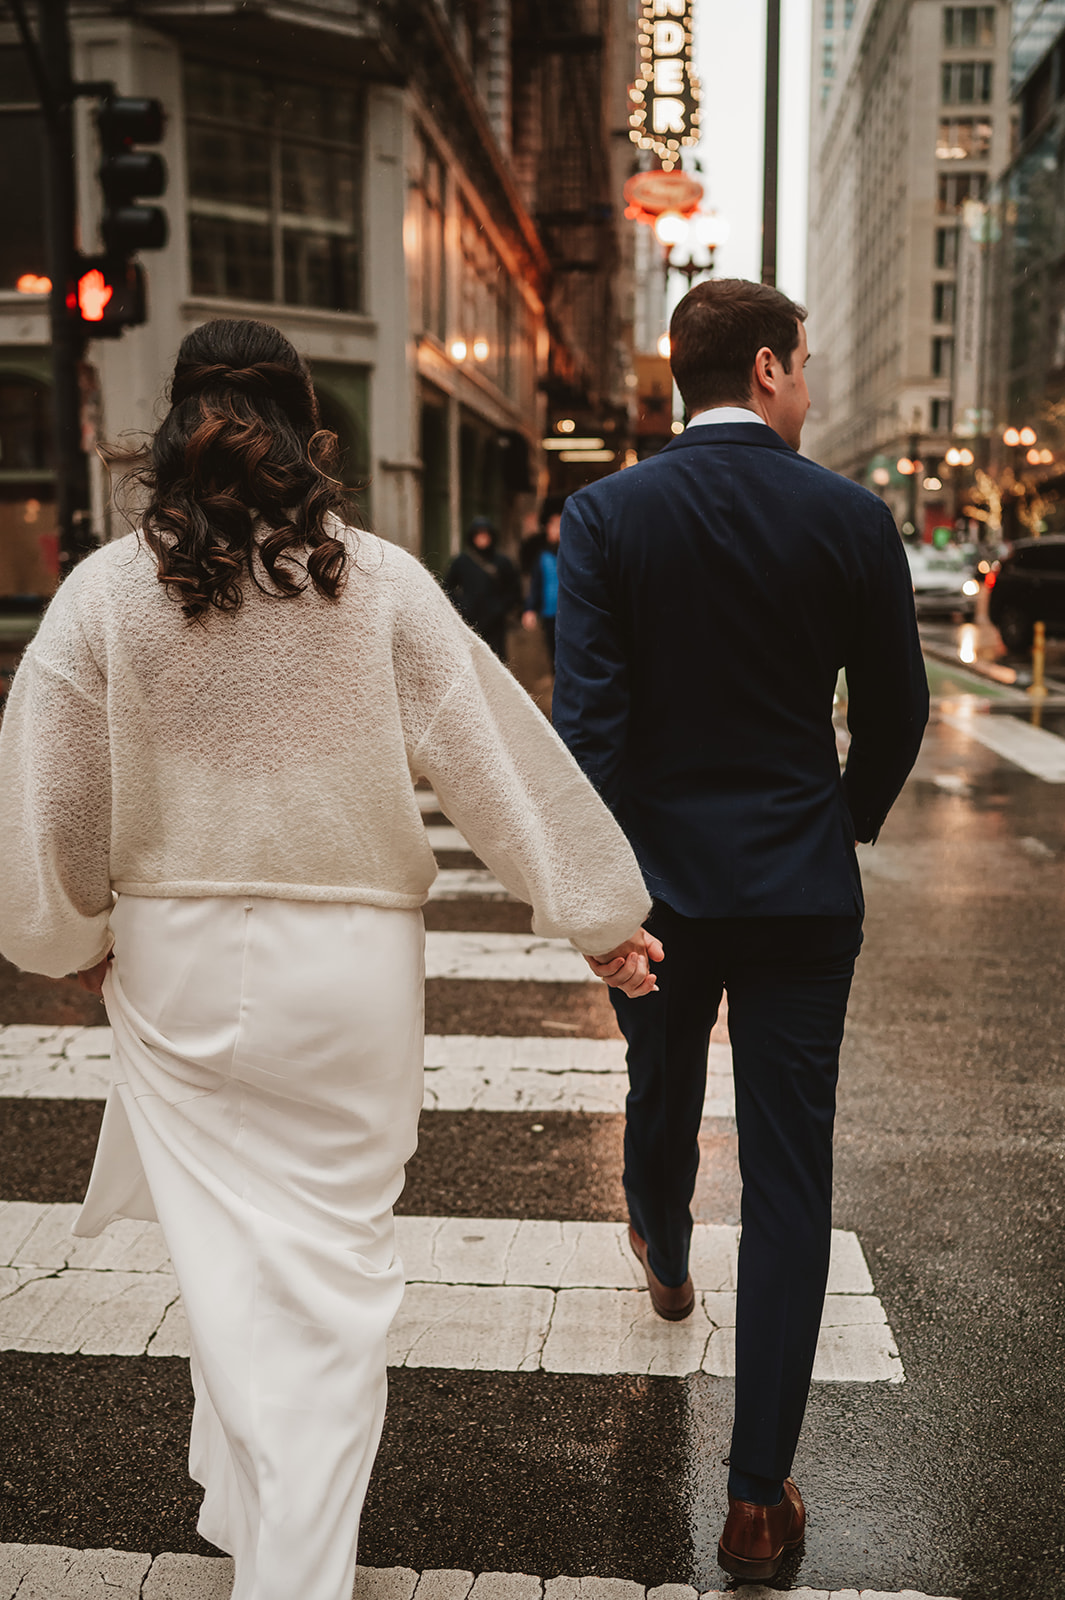 Intimate rainy day Chicago elopement wedding photography - walking through the streets of Chicago